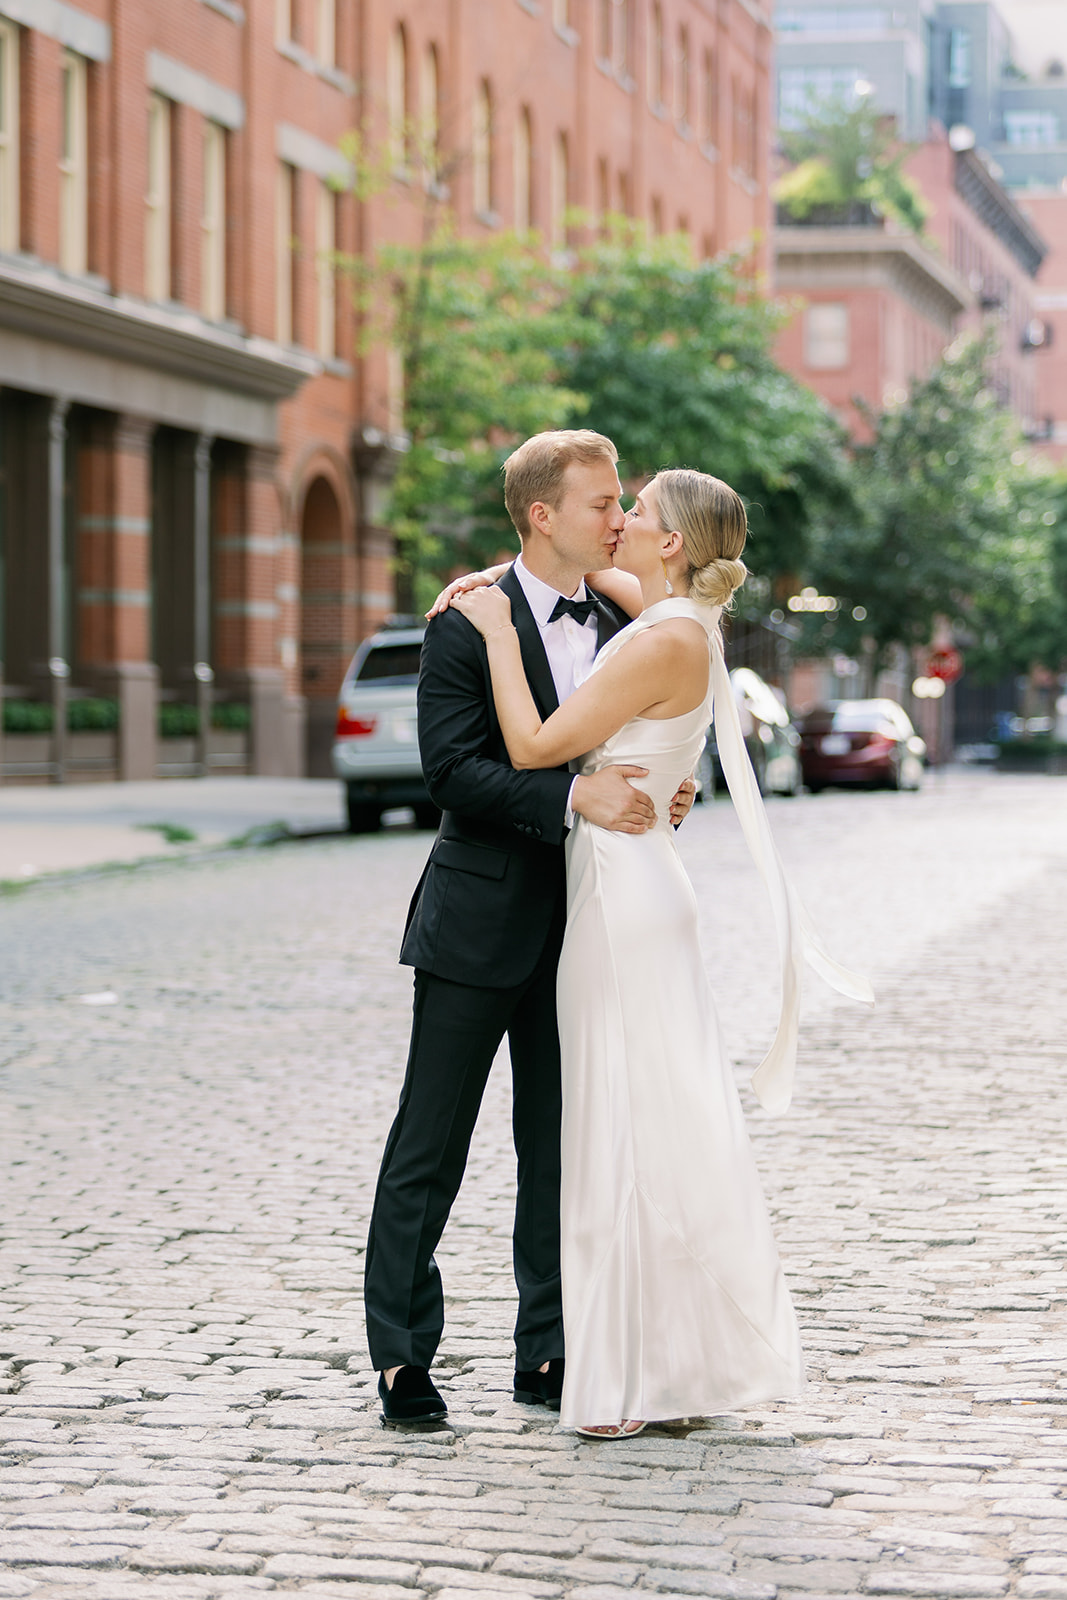 Bride and groom share a kiss on a cobblestone street in the West Village, a beautiful moment in their New York wedding portrait.